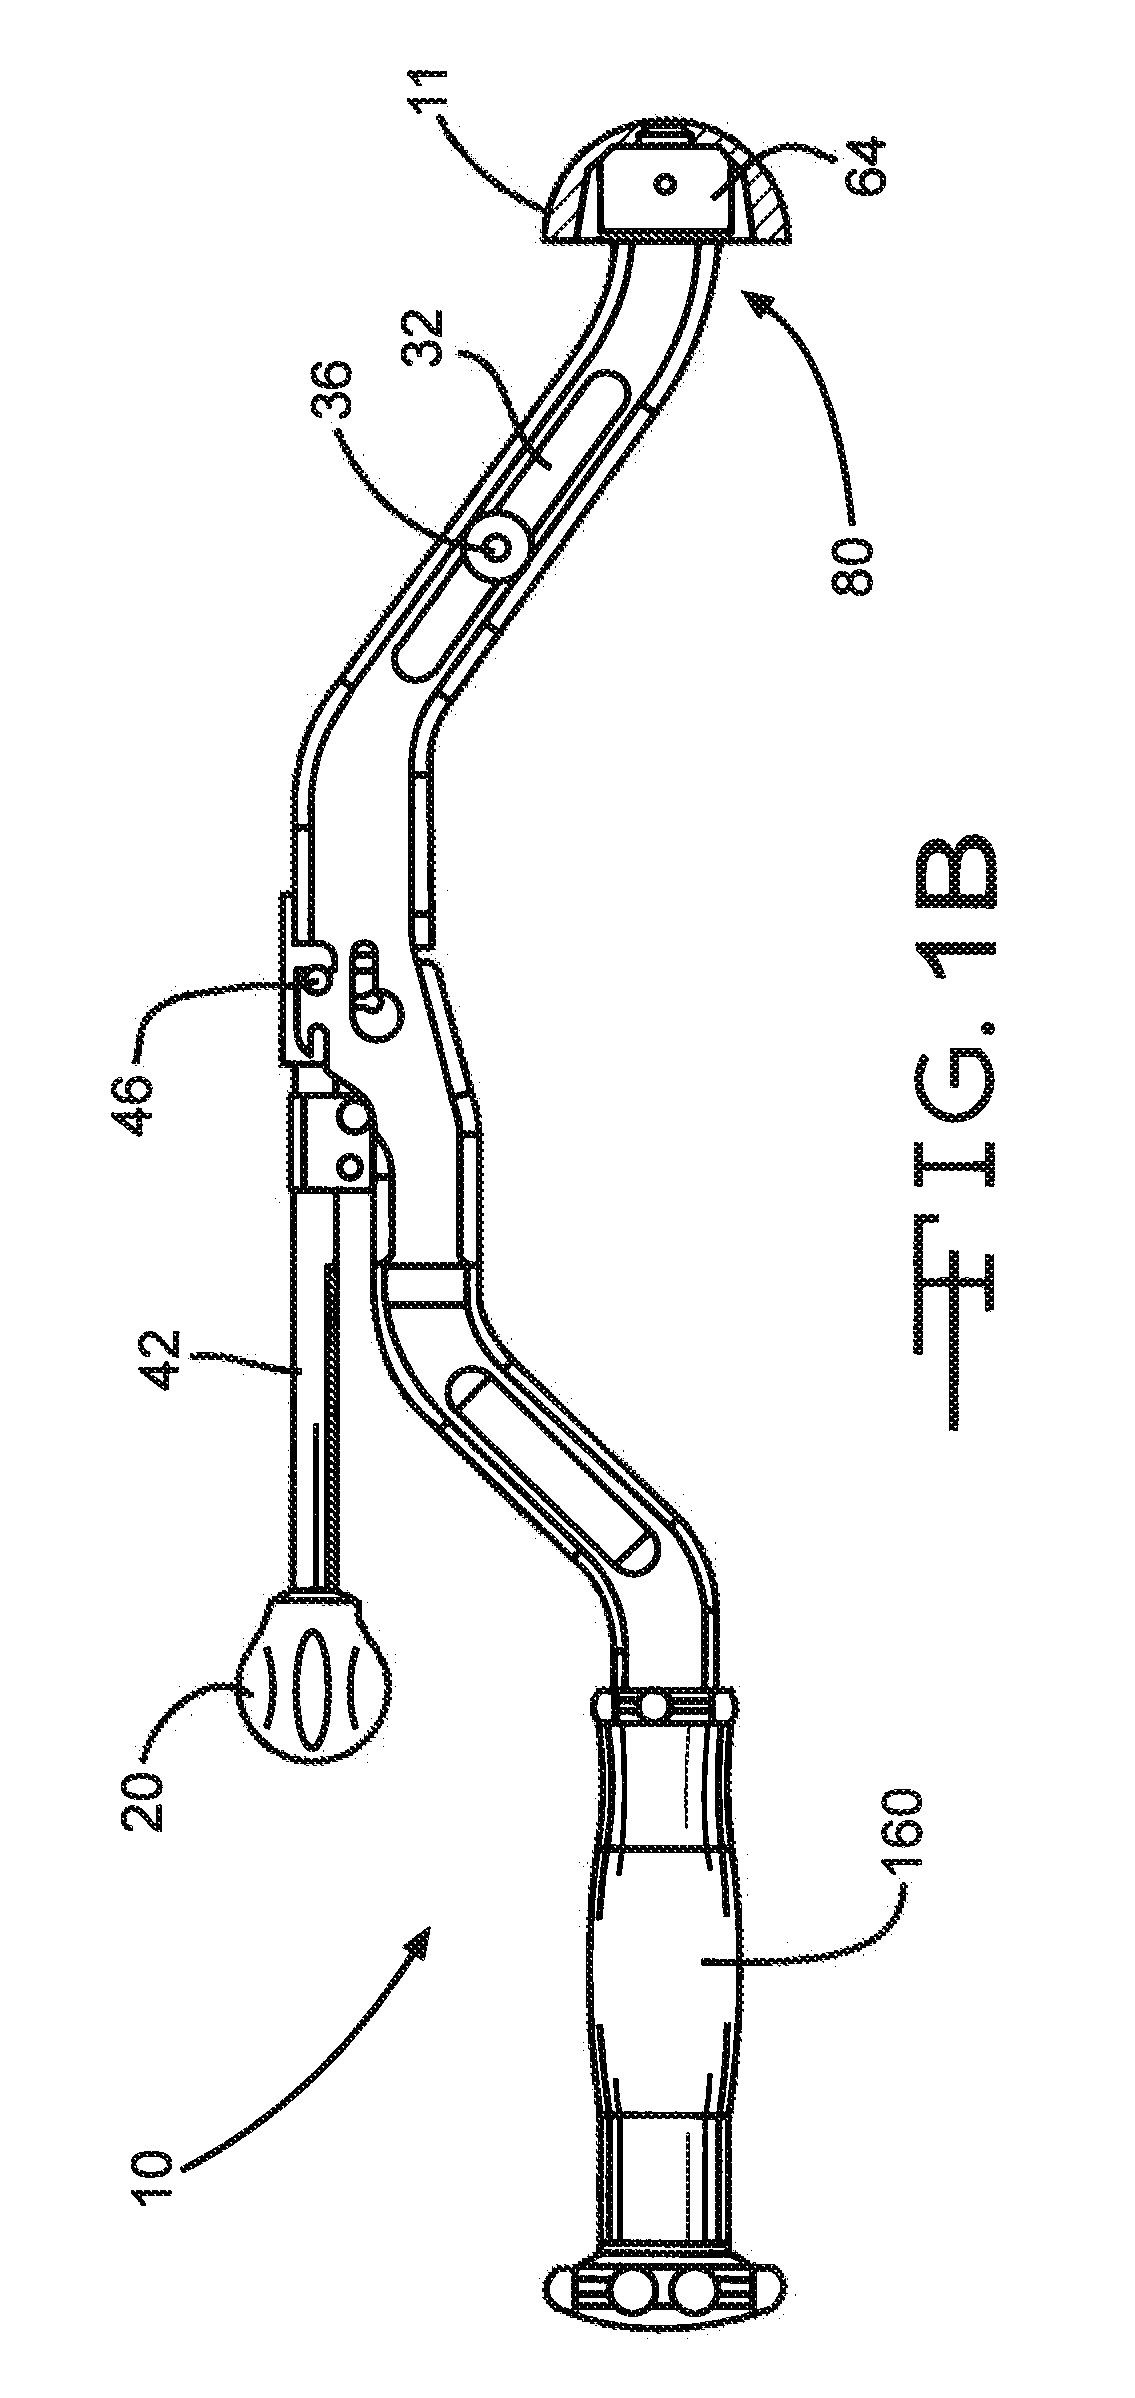 Inserter For Minimally Invasive Joint Surgery Having an Interchangeable Prosthesis Engaging Piston